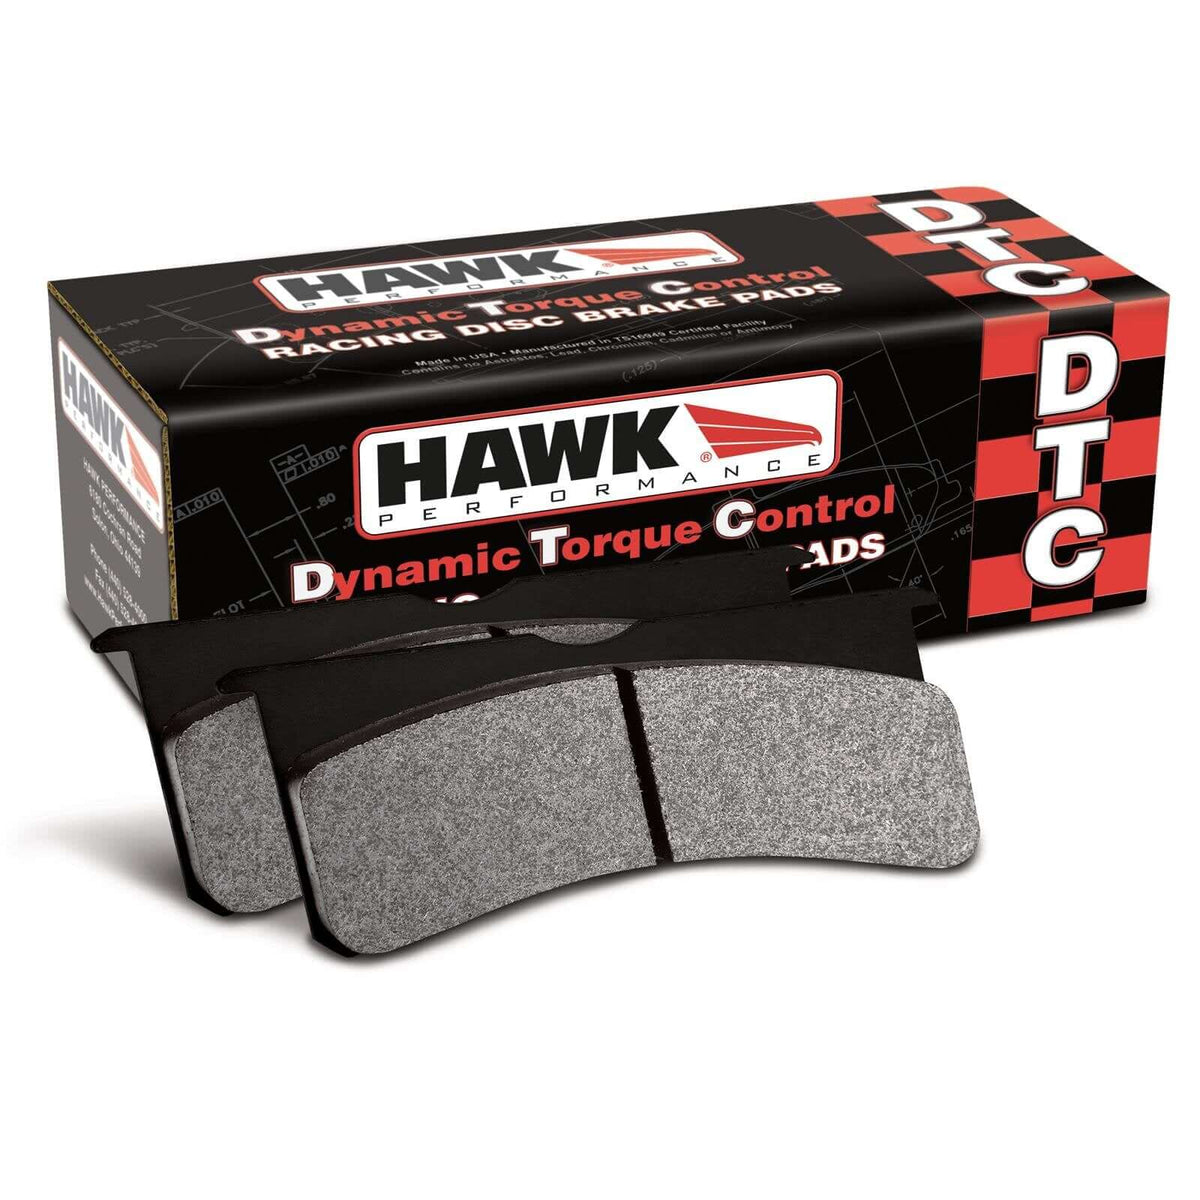 non-M E36: DTC 60 Brake Pads (Fronts) - $250.19